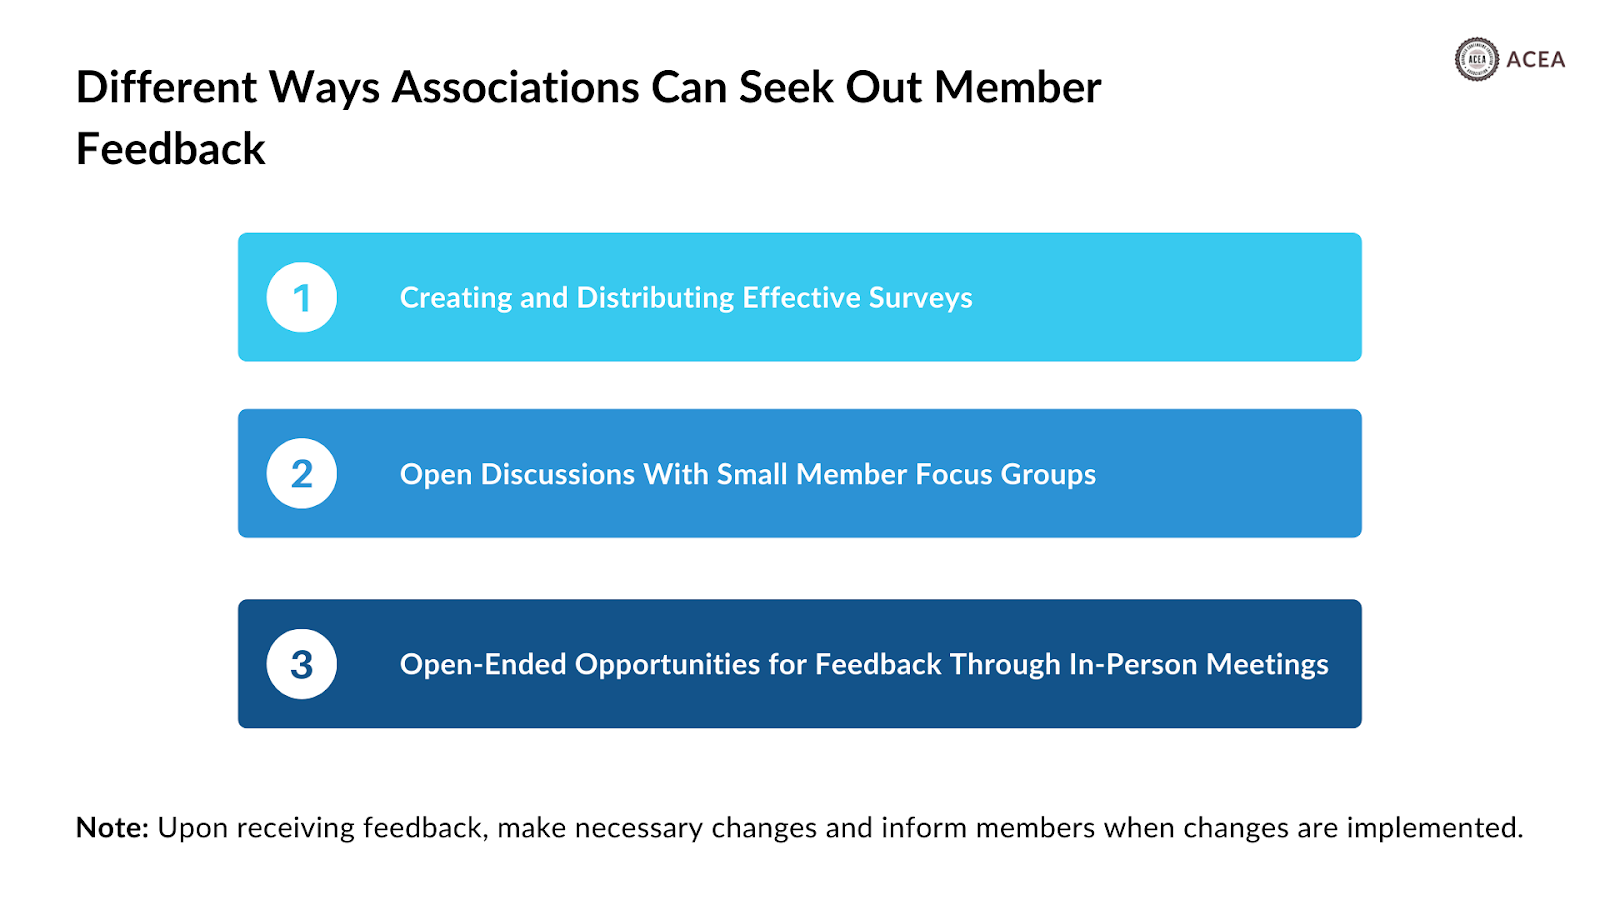 Different ways associations can seek out member feedback